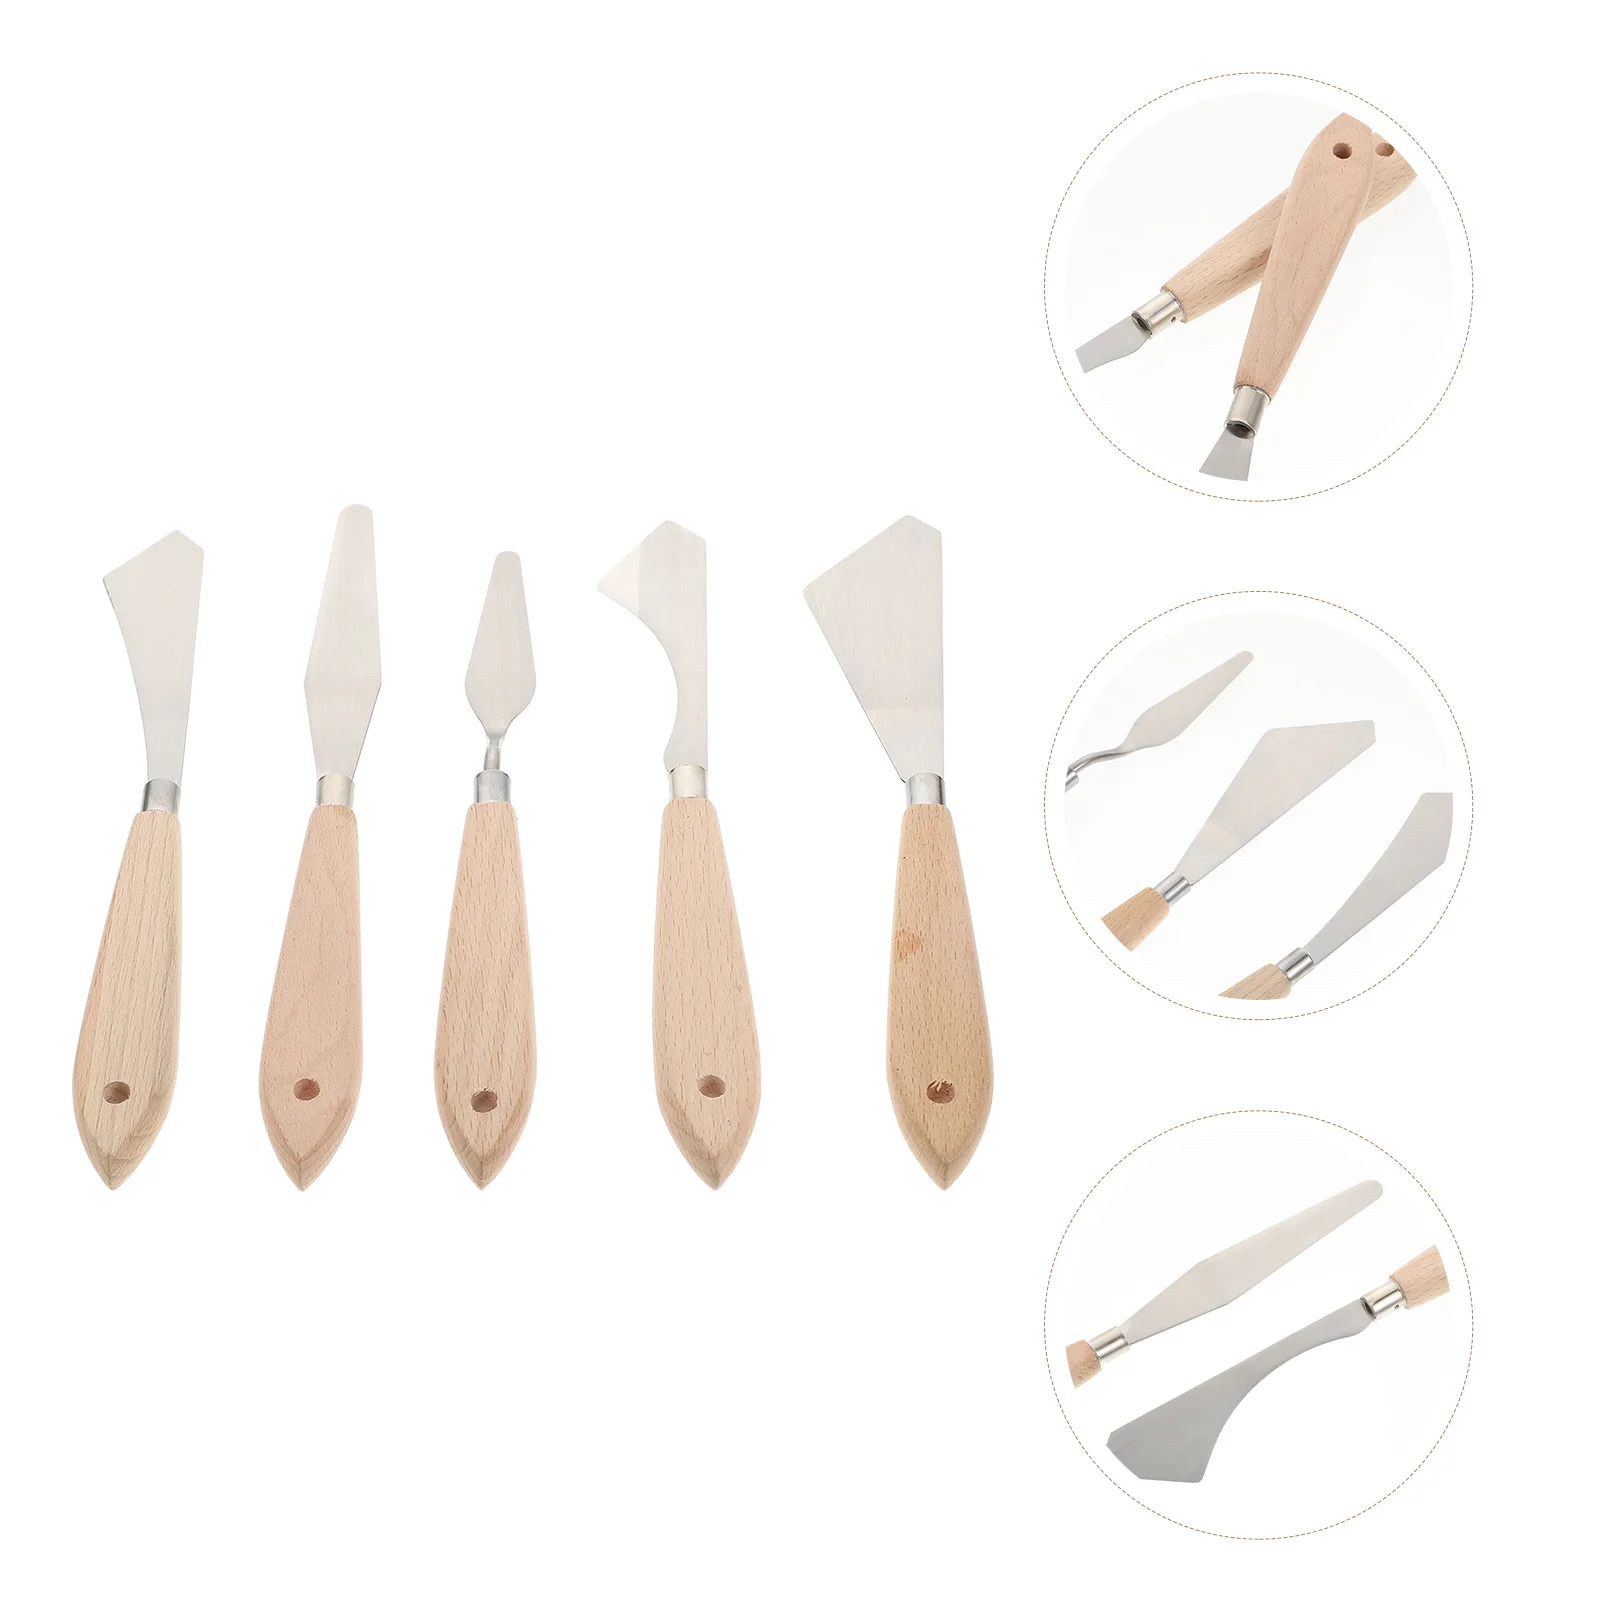 Shaped Oil Painting Knife Practical Spatulas Canvas Tool Stainless Steel Cutters Shovels Metal Palette Painting Scrapers